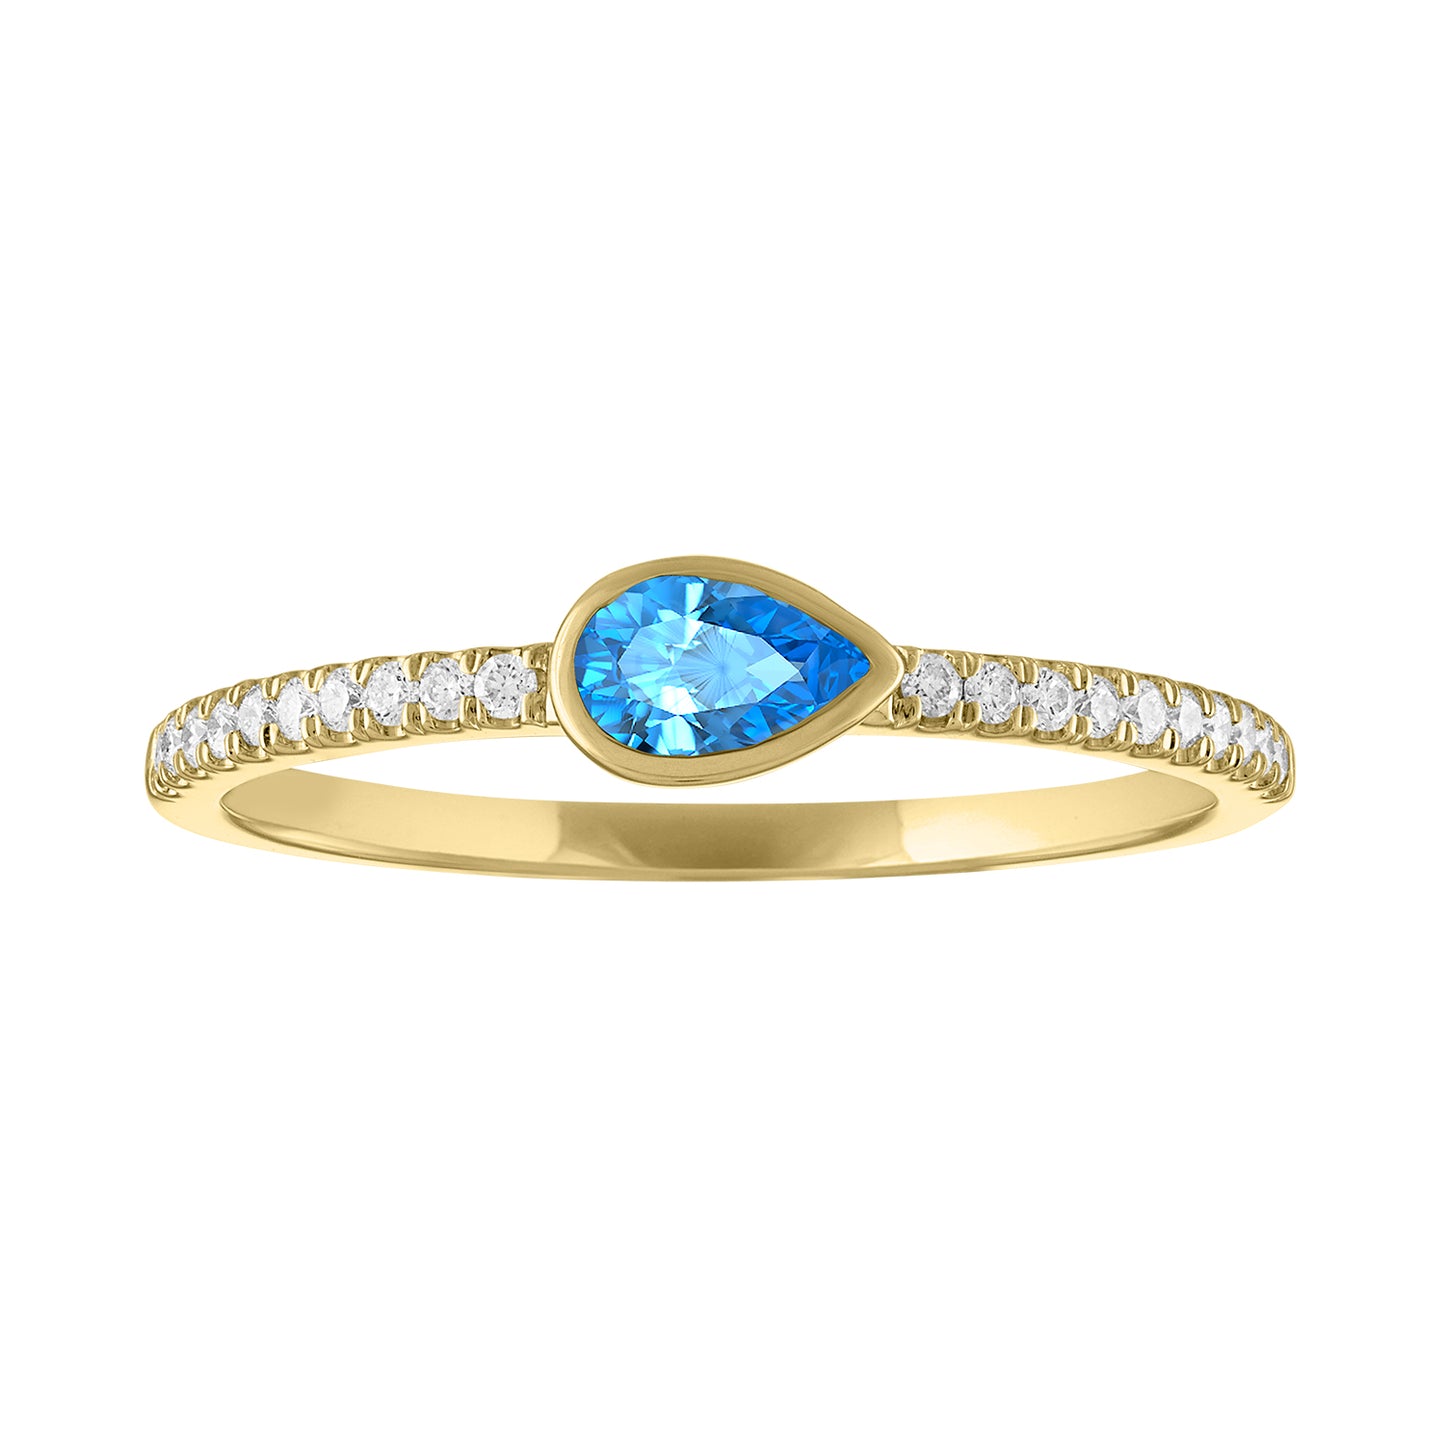 Yellow gold skinny band with a bezeled pear shape blue topaz in the center and round diamonds on the shank. 